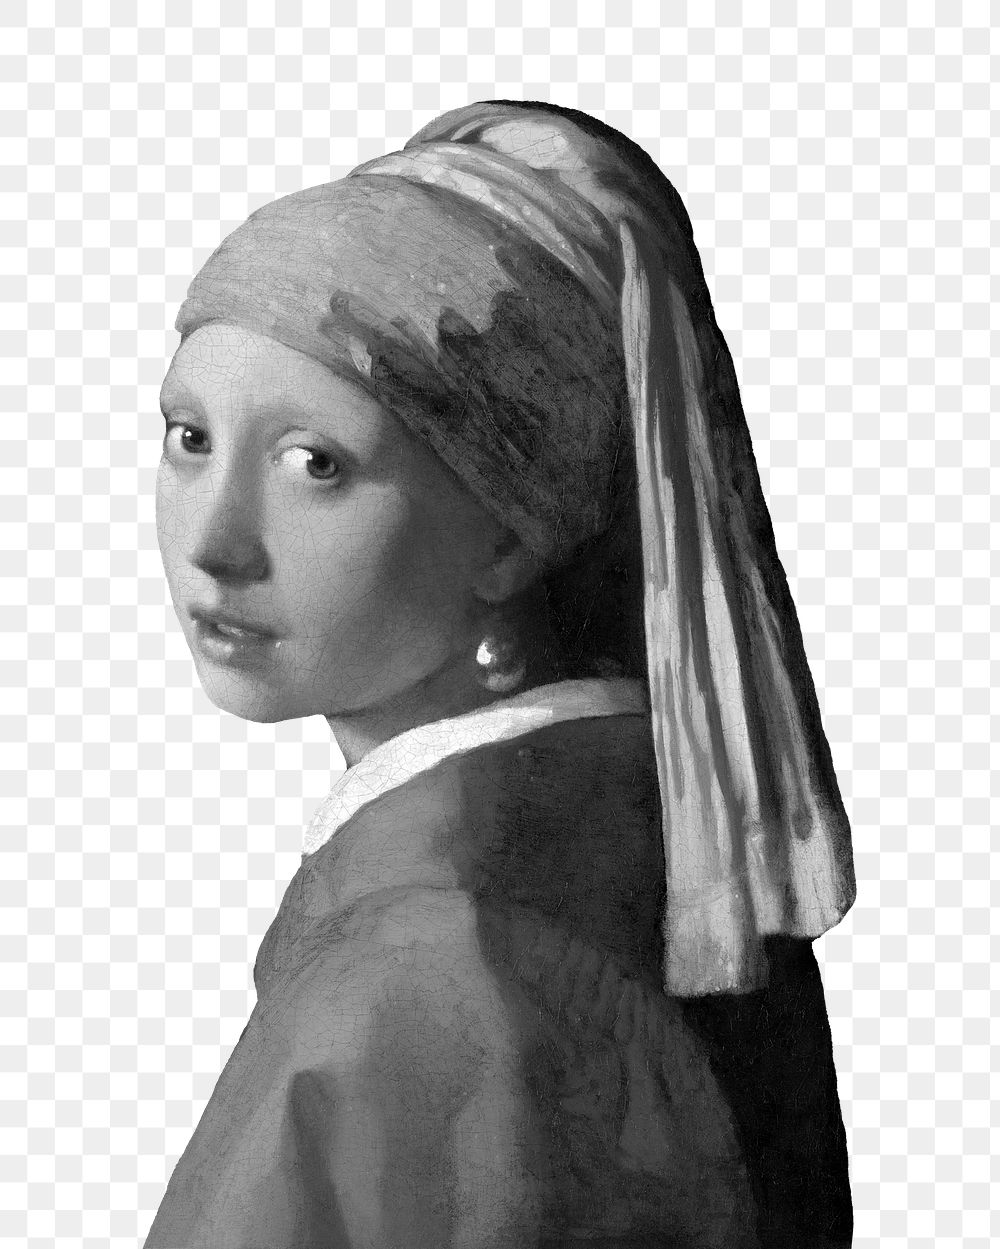 Girl with pearl earring png b&w element, transparent background. Famous artwork by Johannes Vermeer remixed by rawpixel.